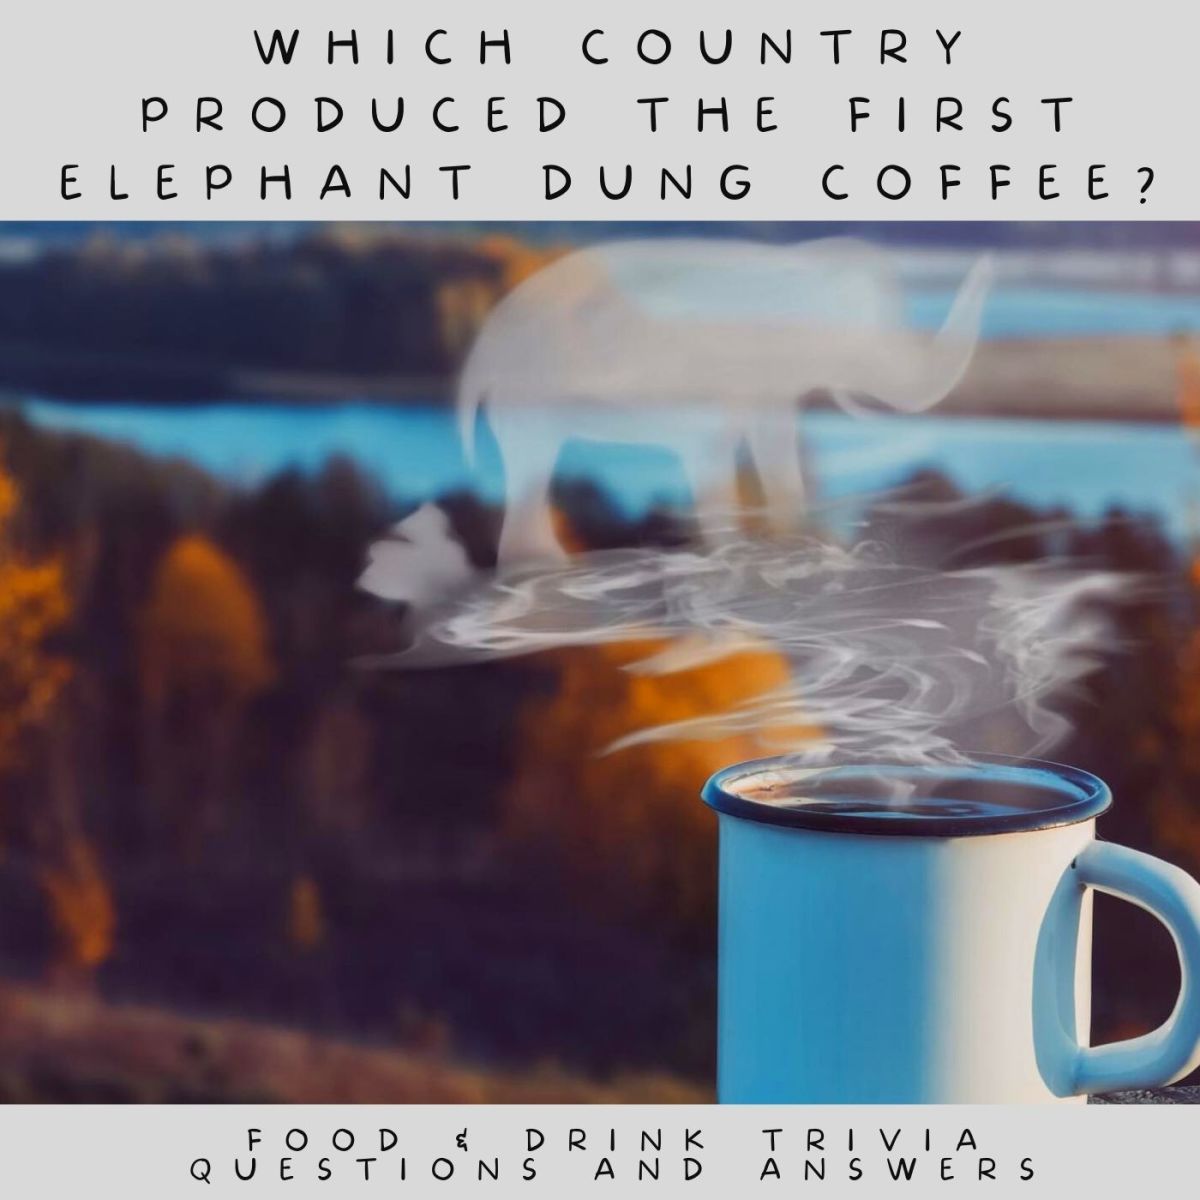 Food trivia question: Which country produced the first elephant dung coffee? Answer: Thailand.